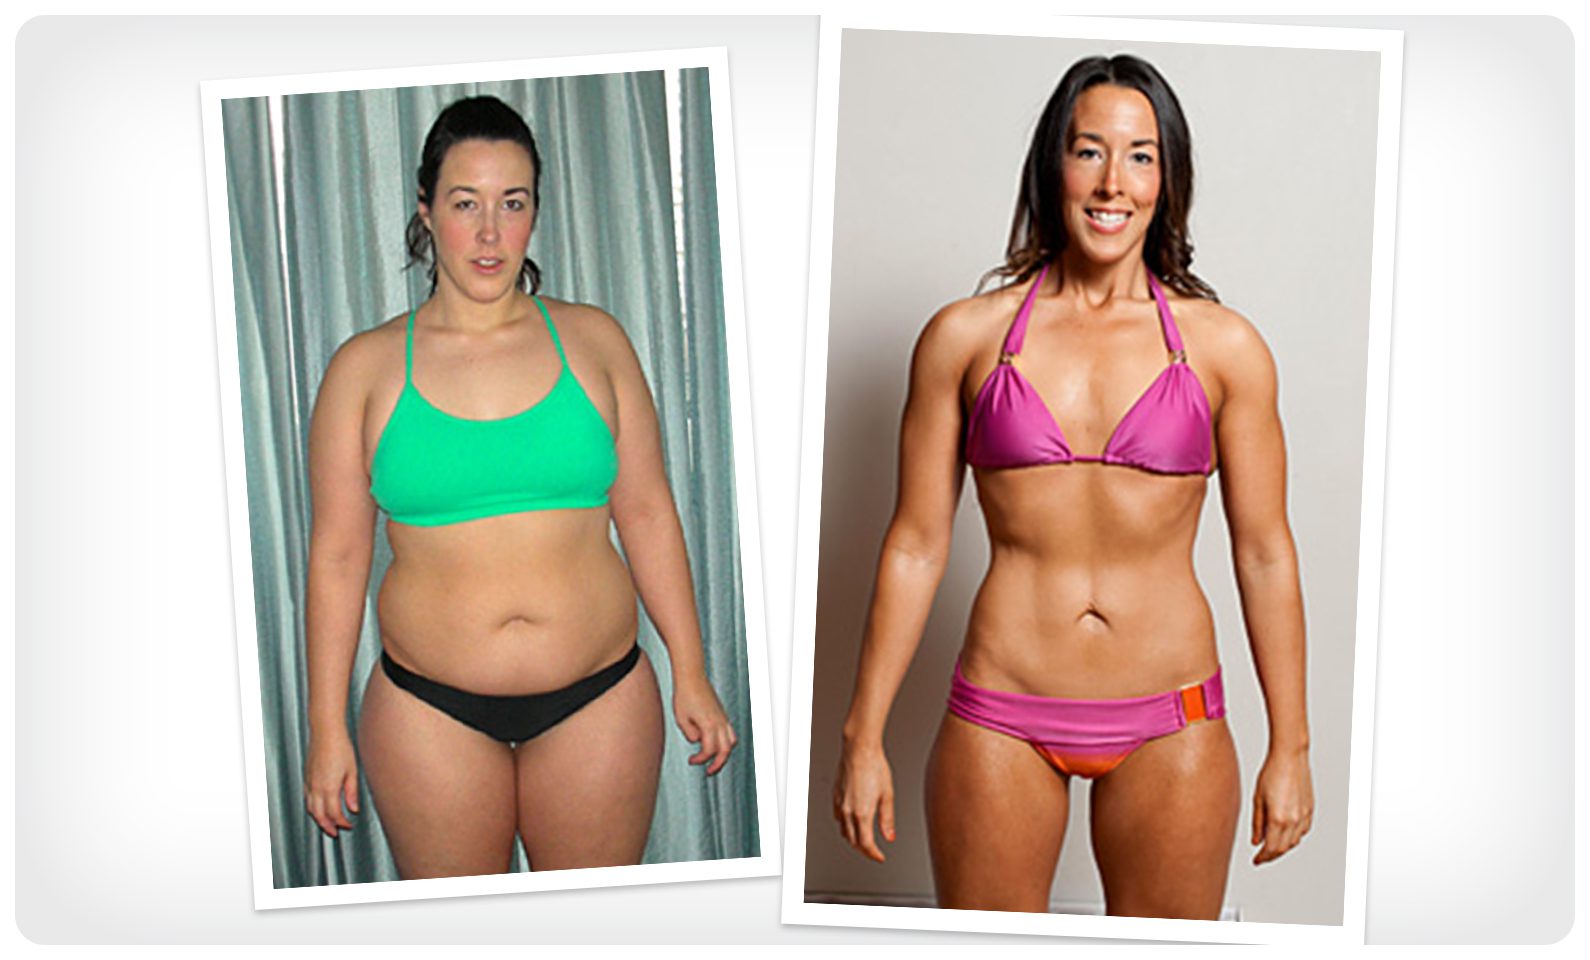 Incredible body transformations from Precision Nutrition